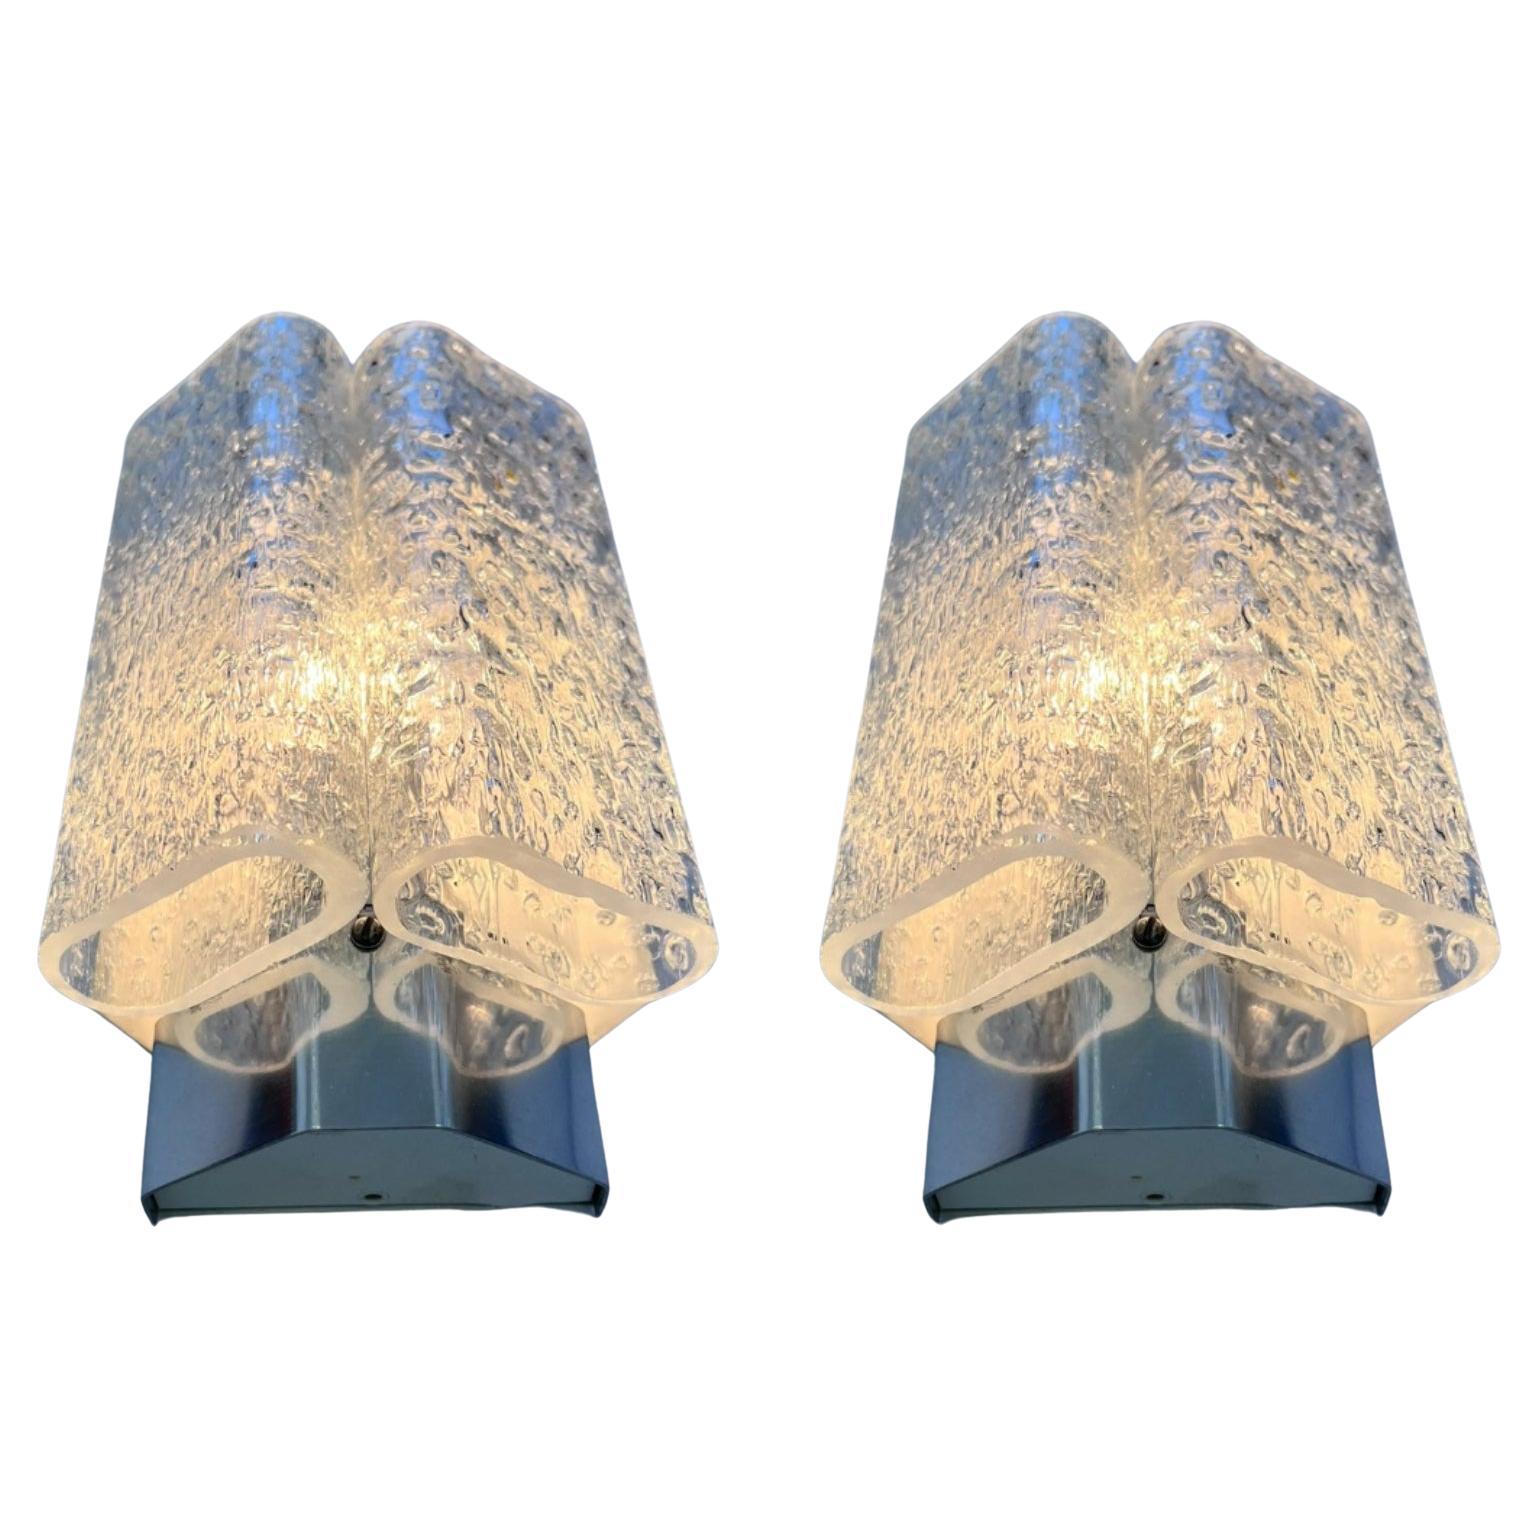 Pair of Midcentury Wall Lamps Doria Leuchten, Germany, 1970s For Sale